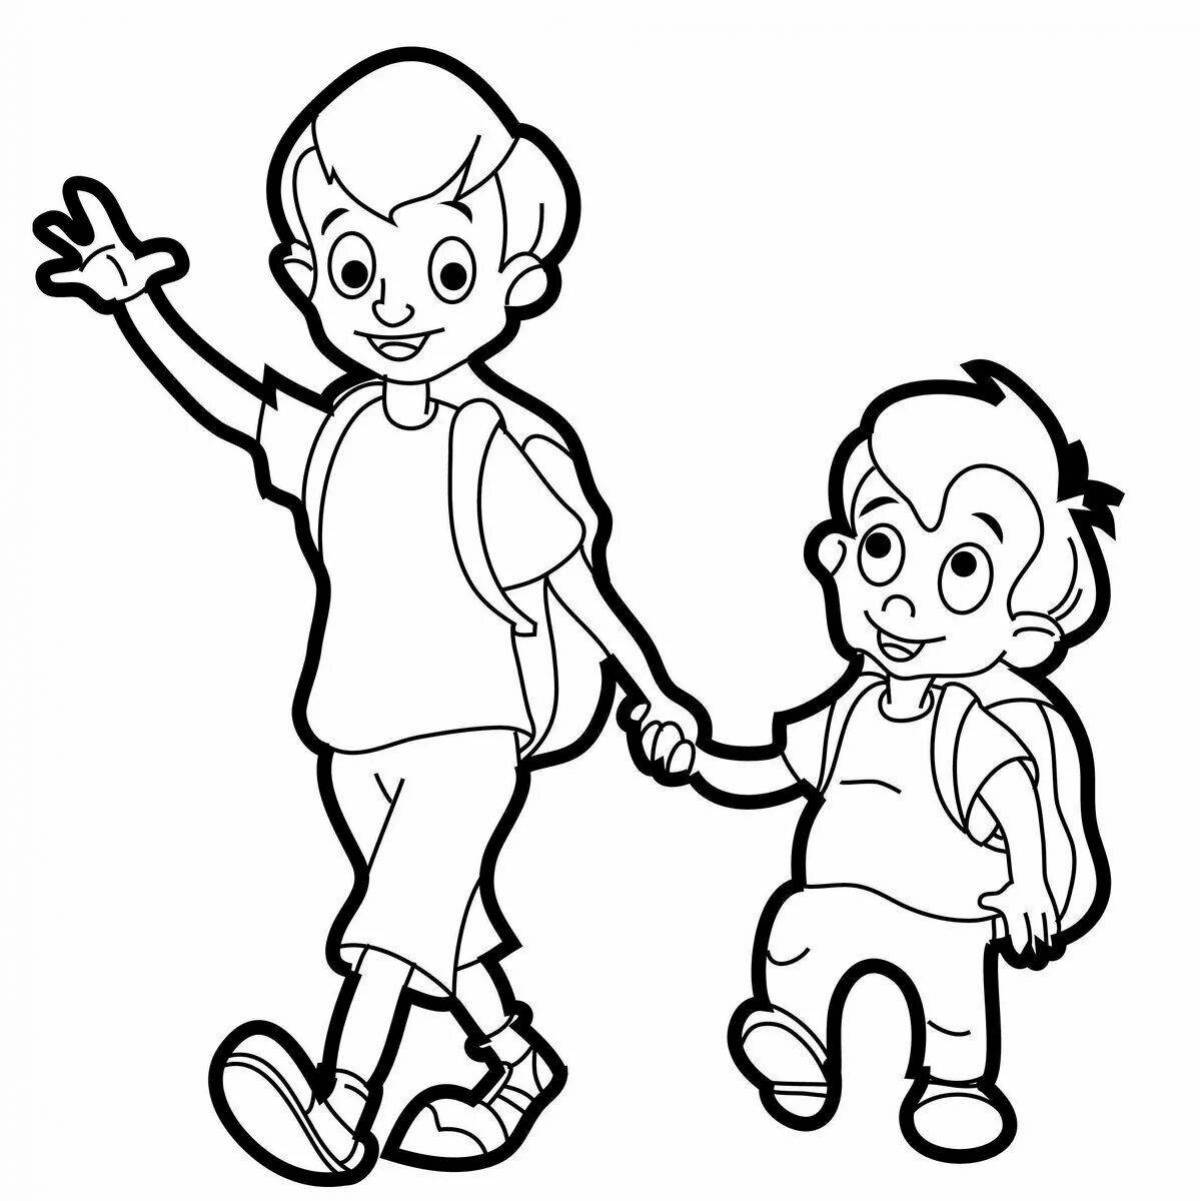 Cute brother and sister coloring pages